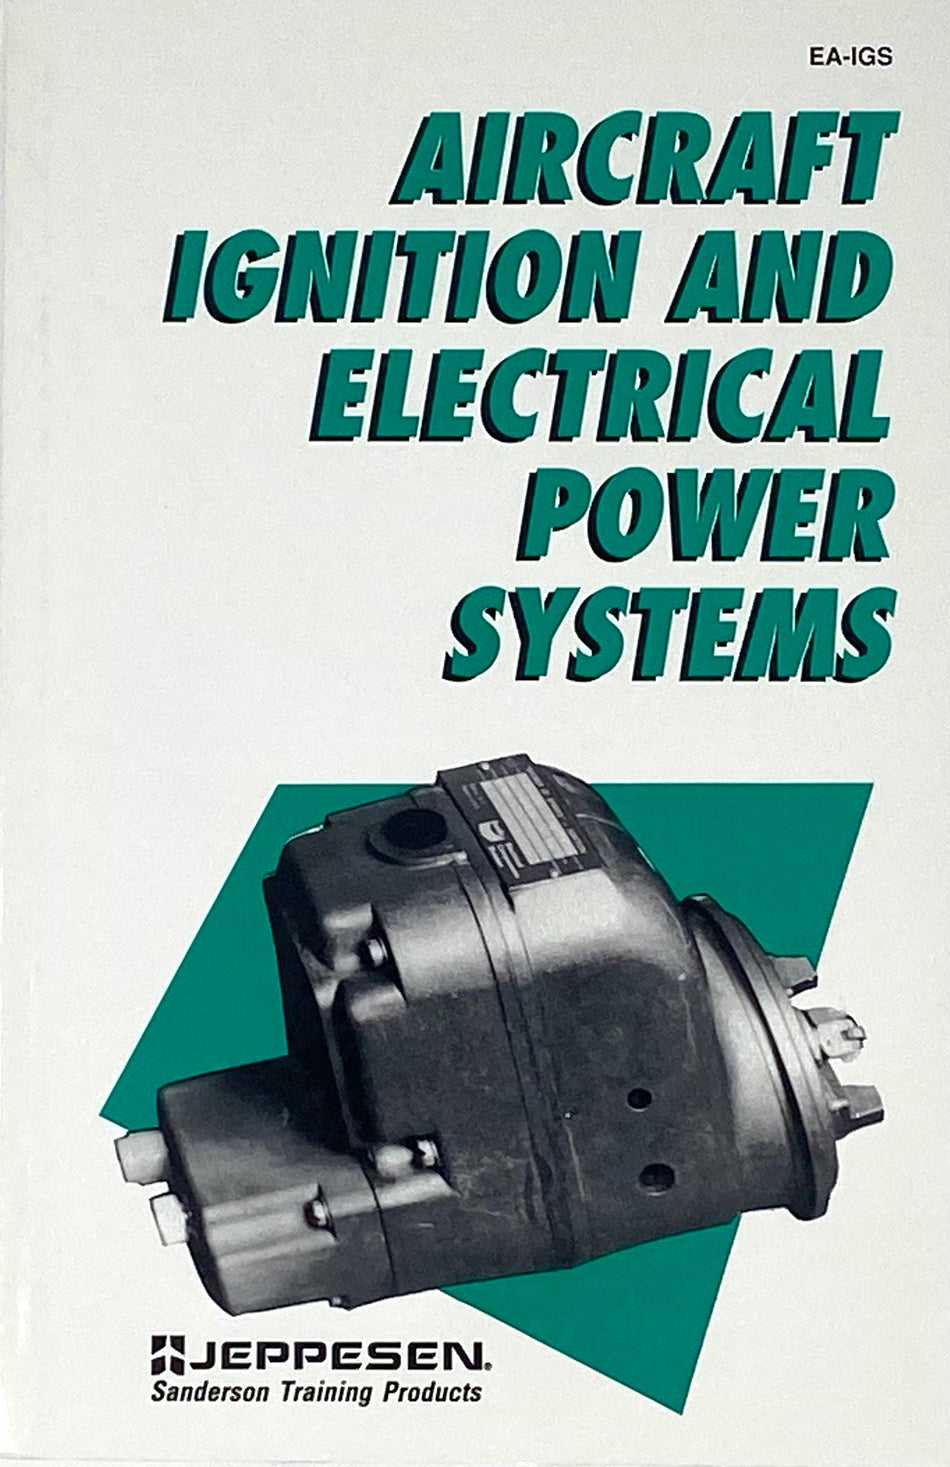 Jeppesen Aircraft Ignition and Electrical Power Systems